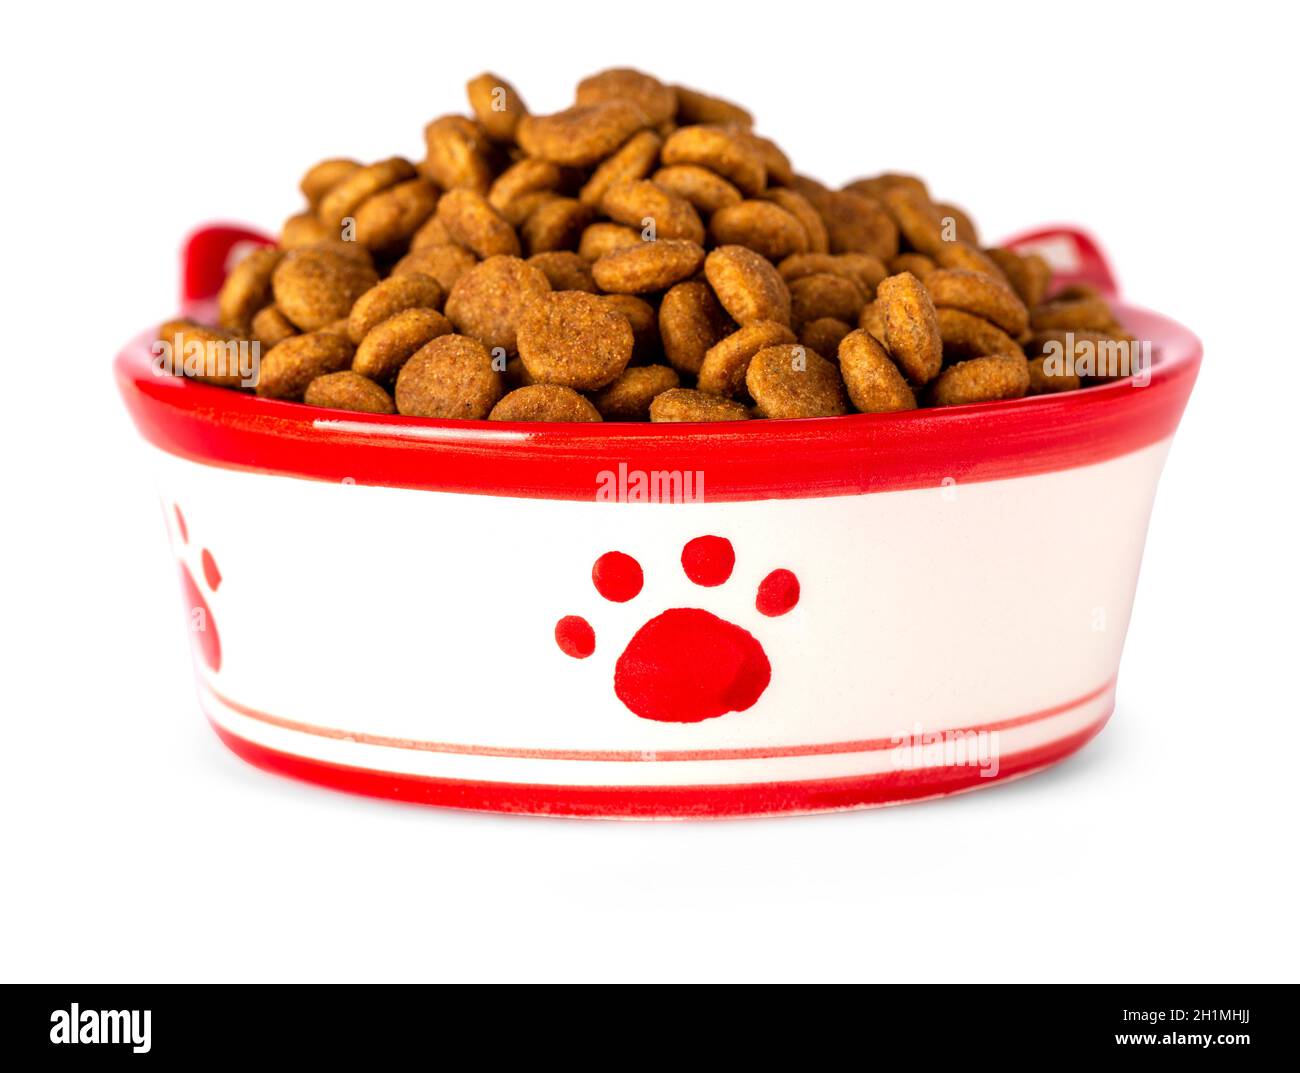 The Dry cat food in a bowl, isolated on white background Stock Photo